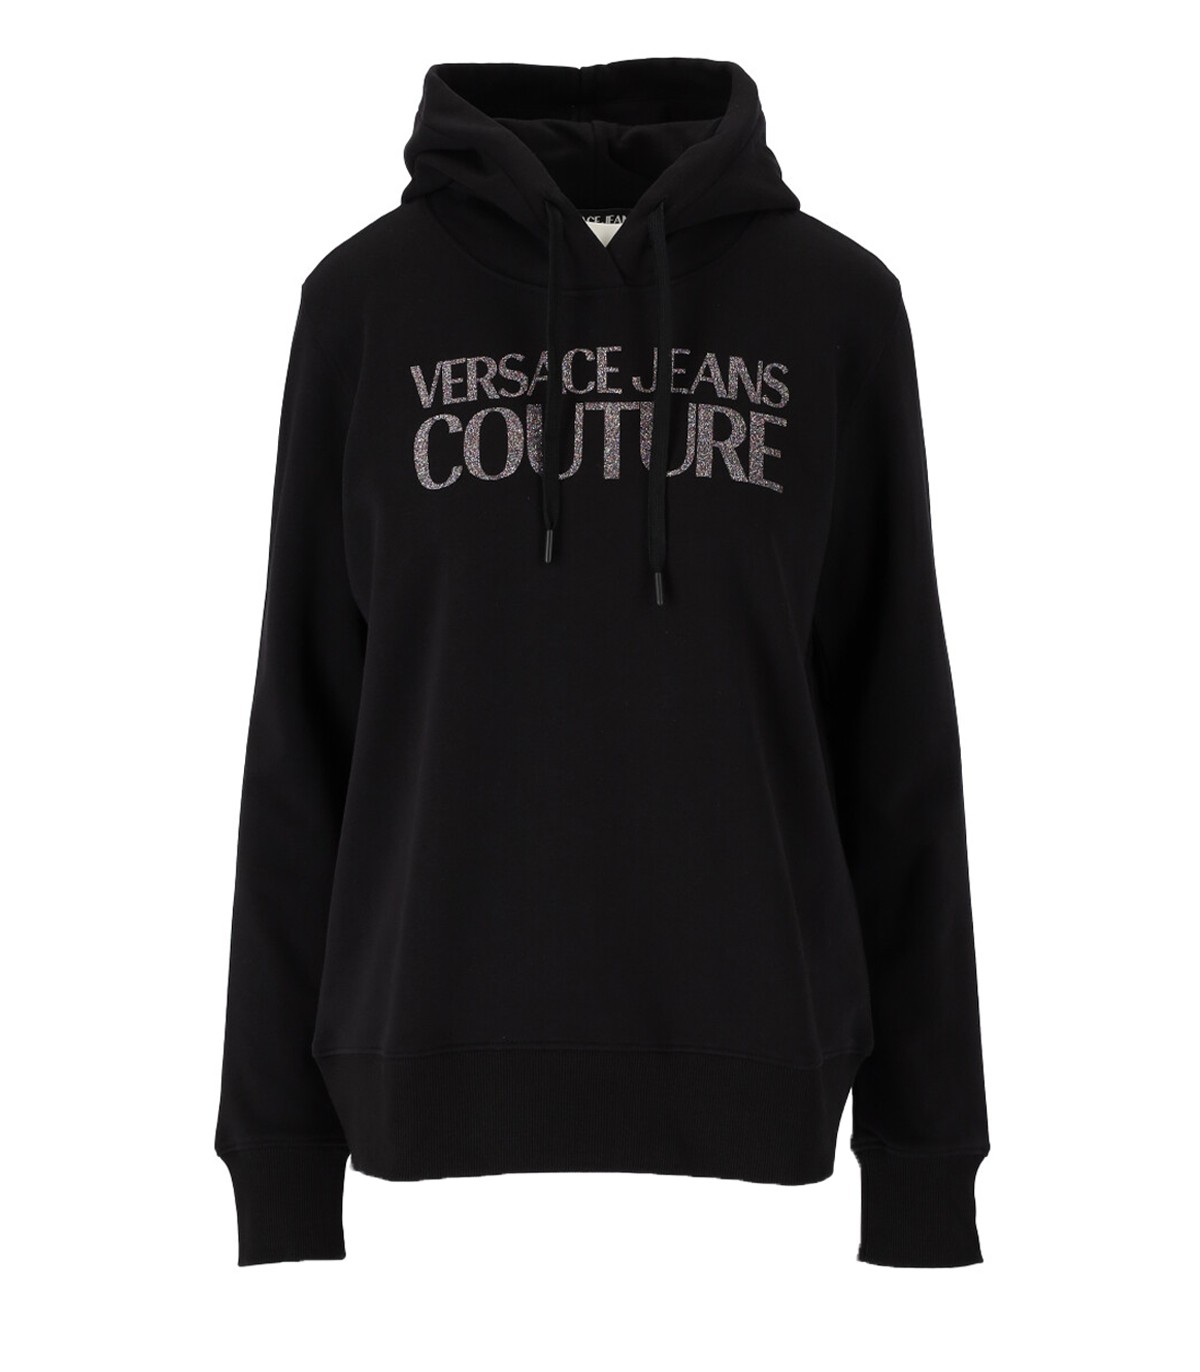 VERSACE JEANS COUTURE LOGO GLITTER BLACK HOODIE